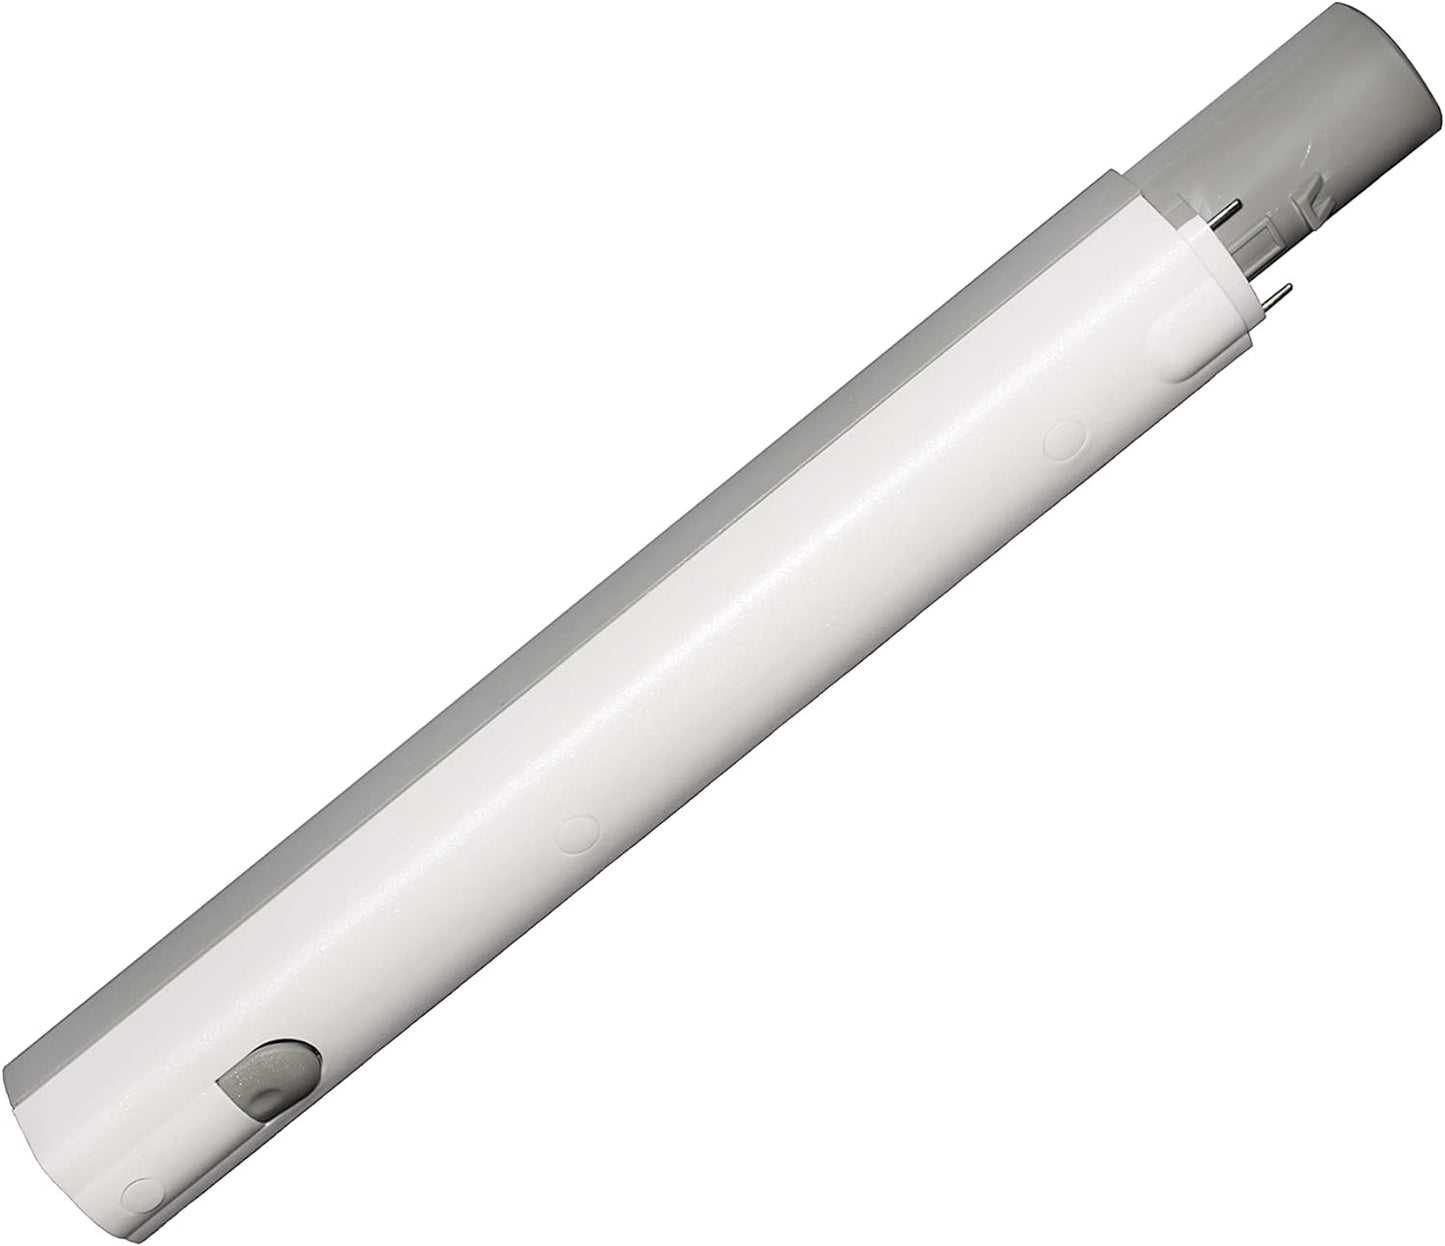 Replacement Wand Tube Compatible with Electrolux Aerus Epic 6500, Guardian 8000, 9000, Renaissance, Legacy, Centralux Vacuum